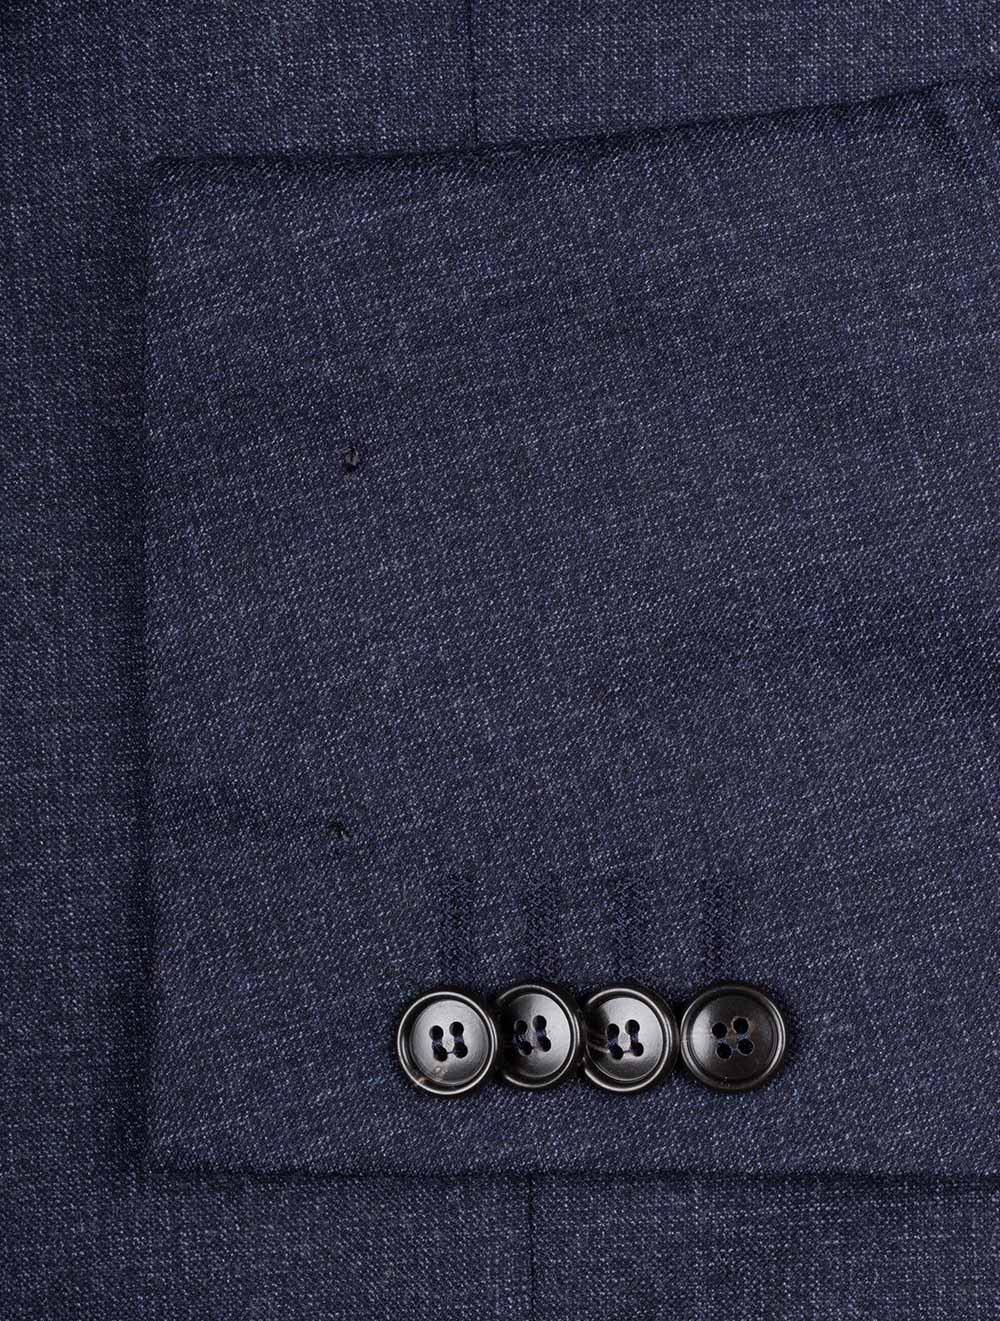 Navy Subtitle Patterned 2 Piece Lined Suit Navy